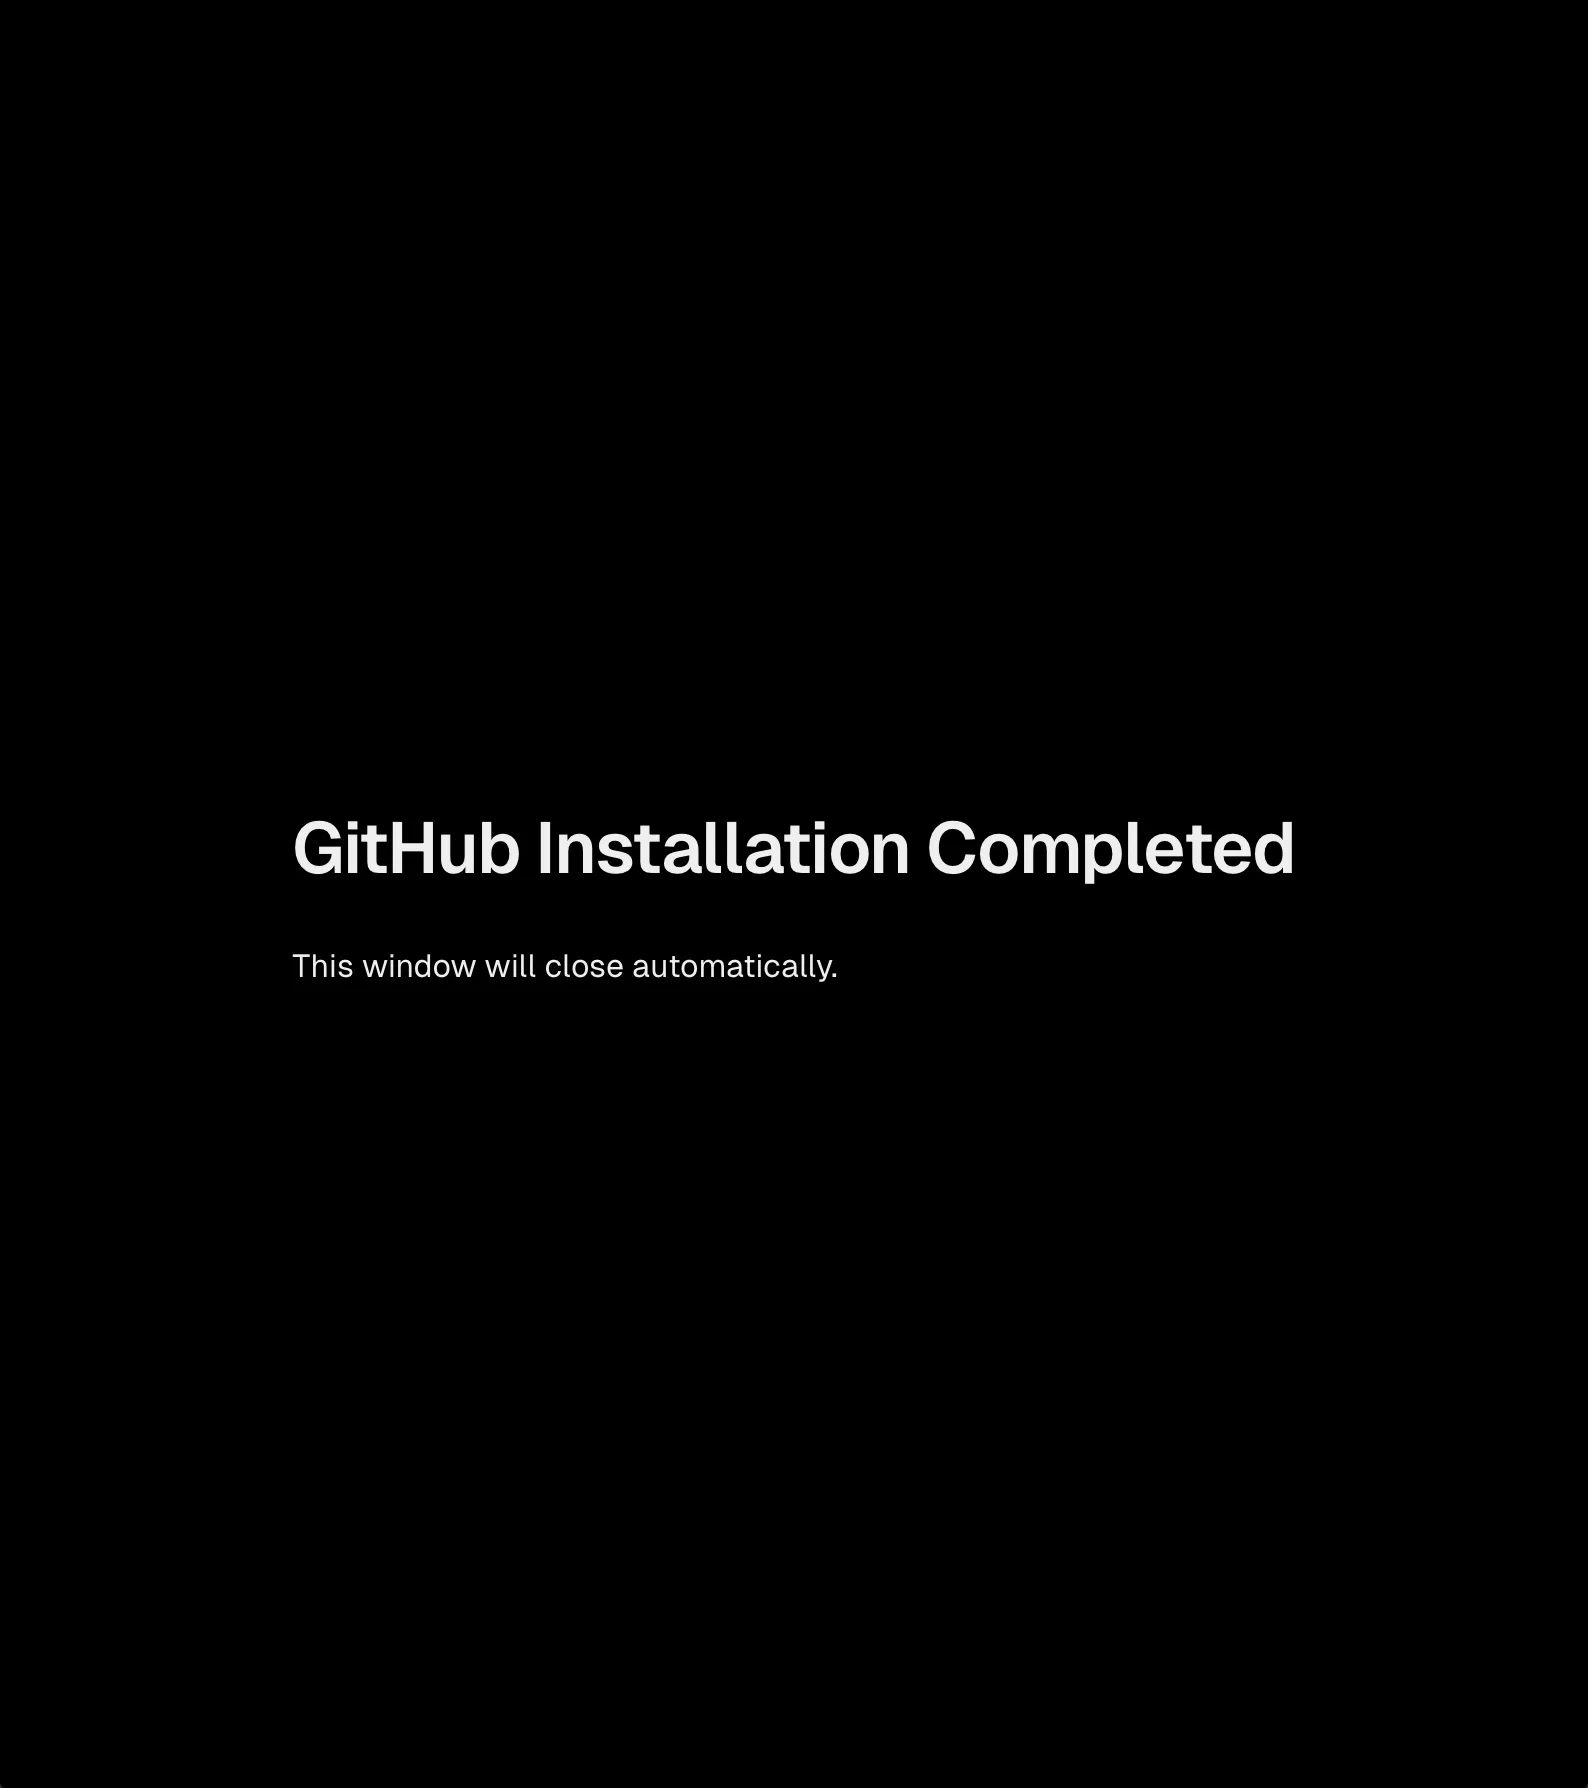 A screenshot of the end of the flow that lets you know that "GitHub Installation Completed. This window will close automatically."